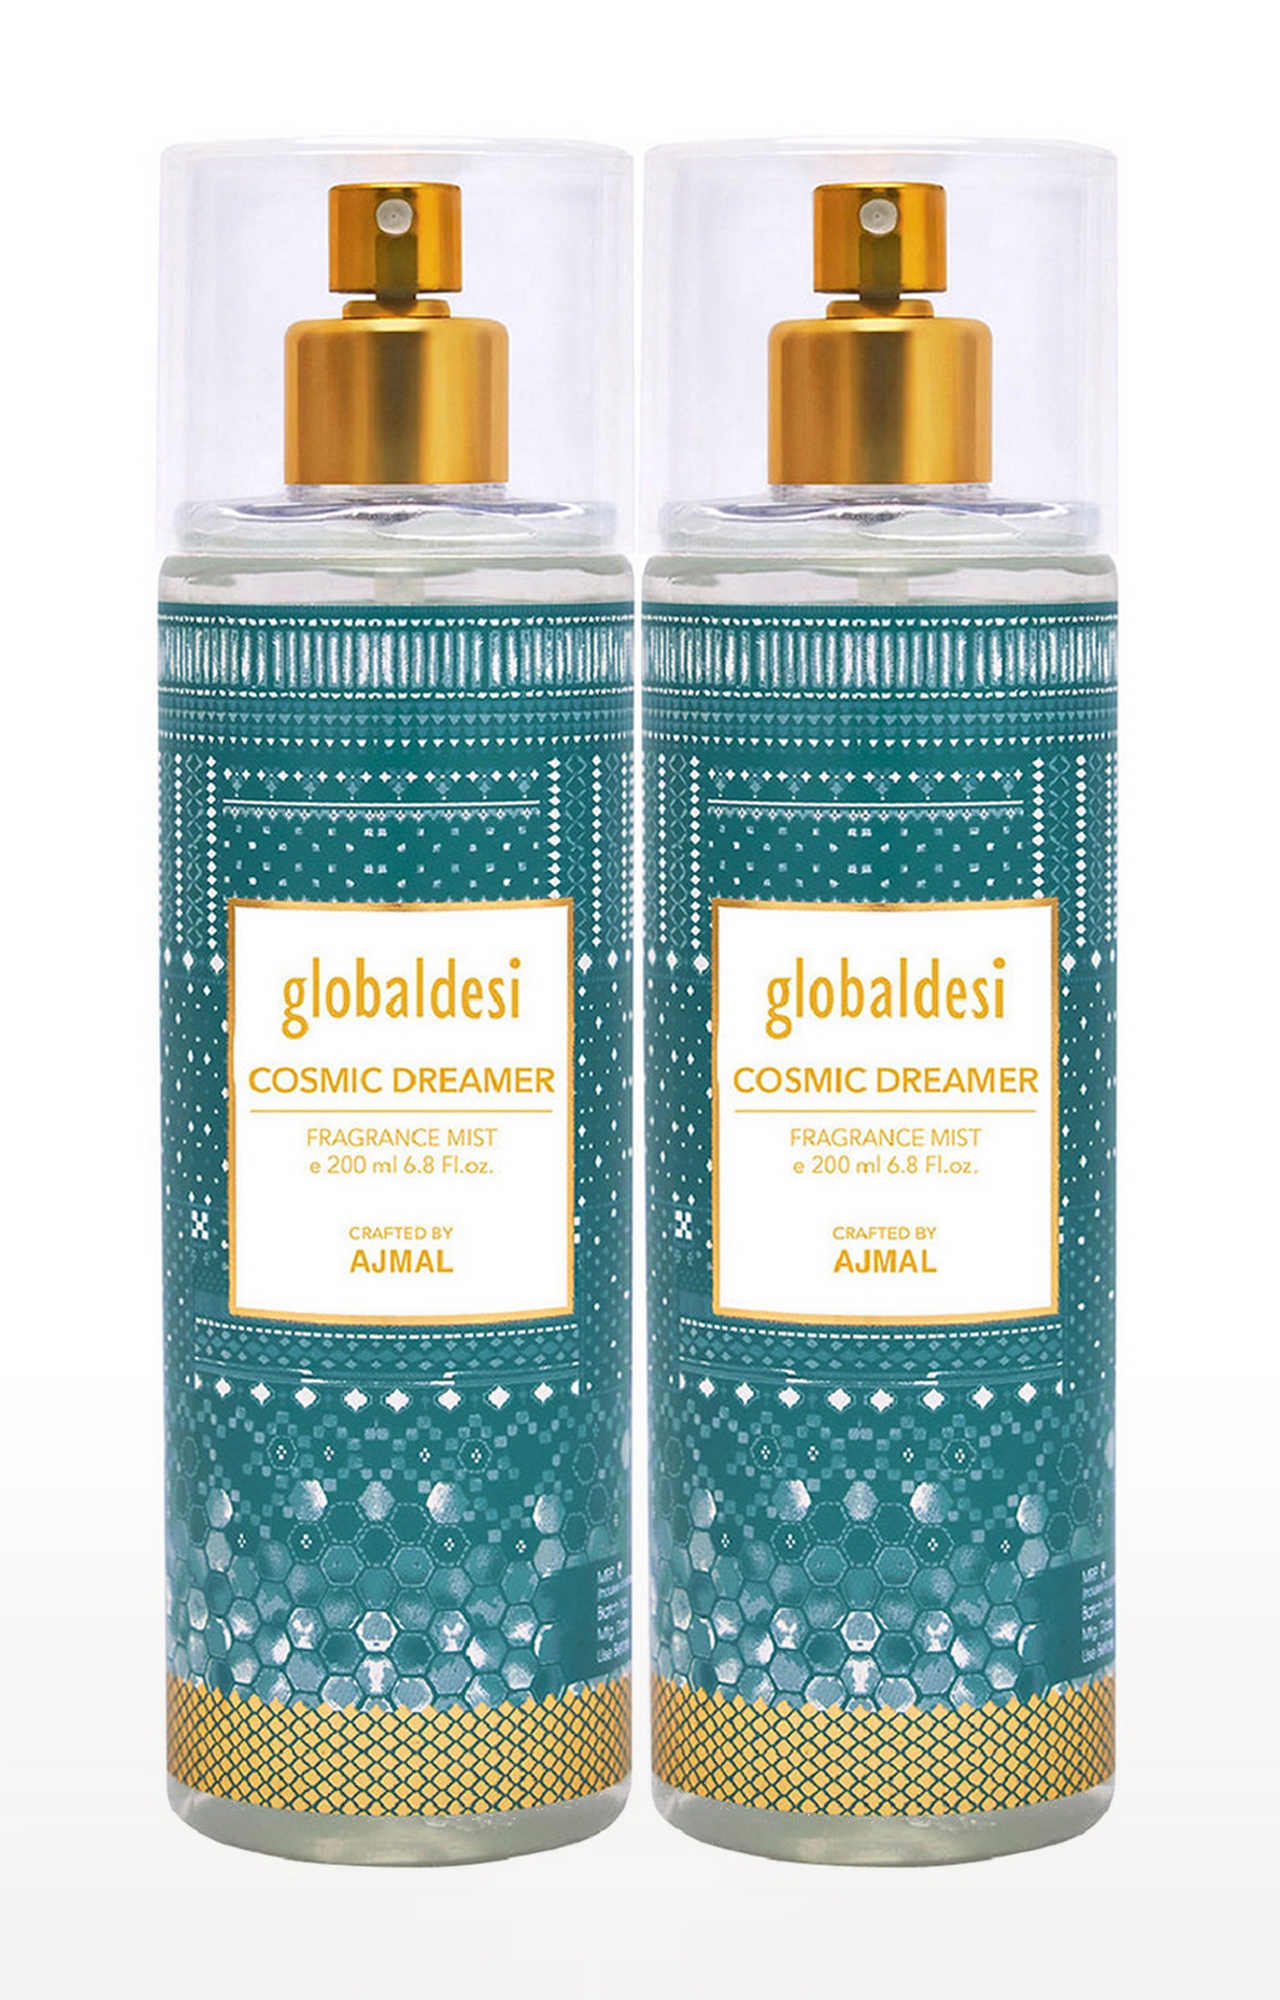 Global Desi Crafted By Ajmal | Global Desi Cosmic Dreamer Pack Of 2 Body Mist 200Ml Each For Women Crafted By Ajmal  